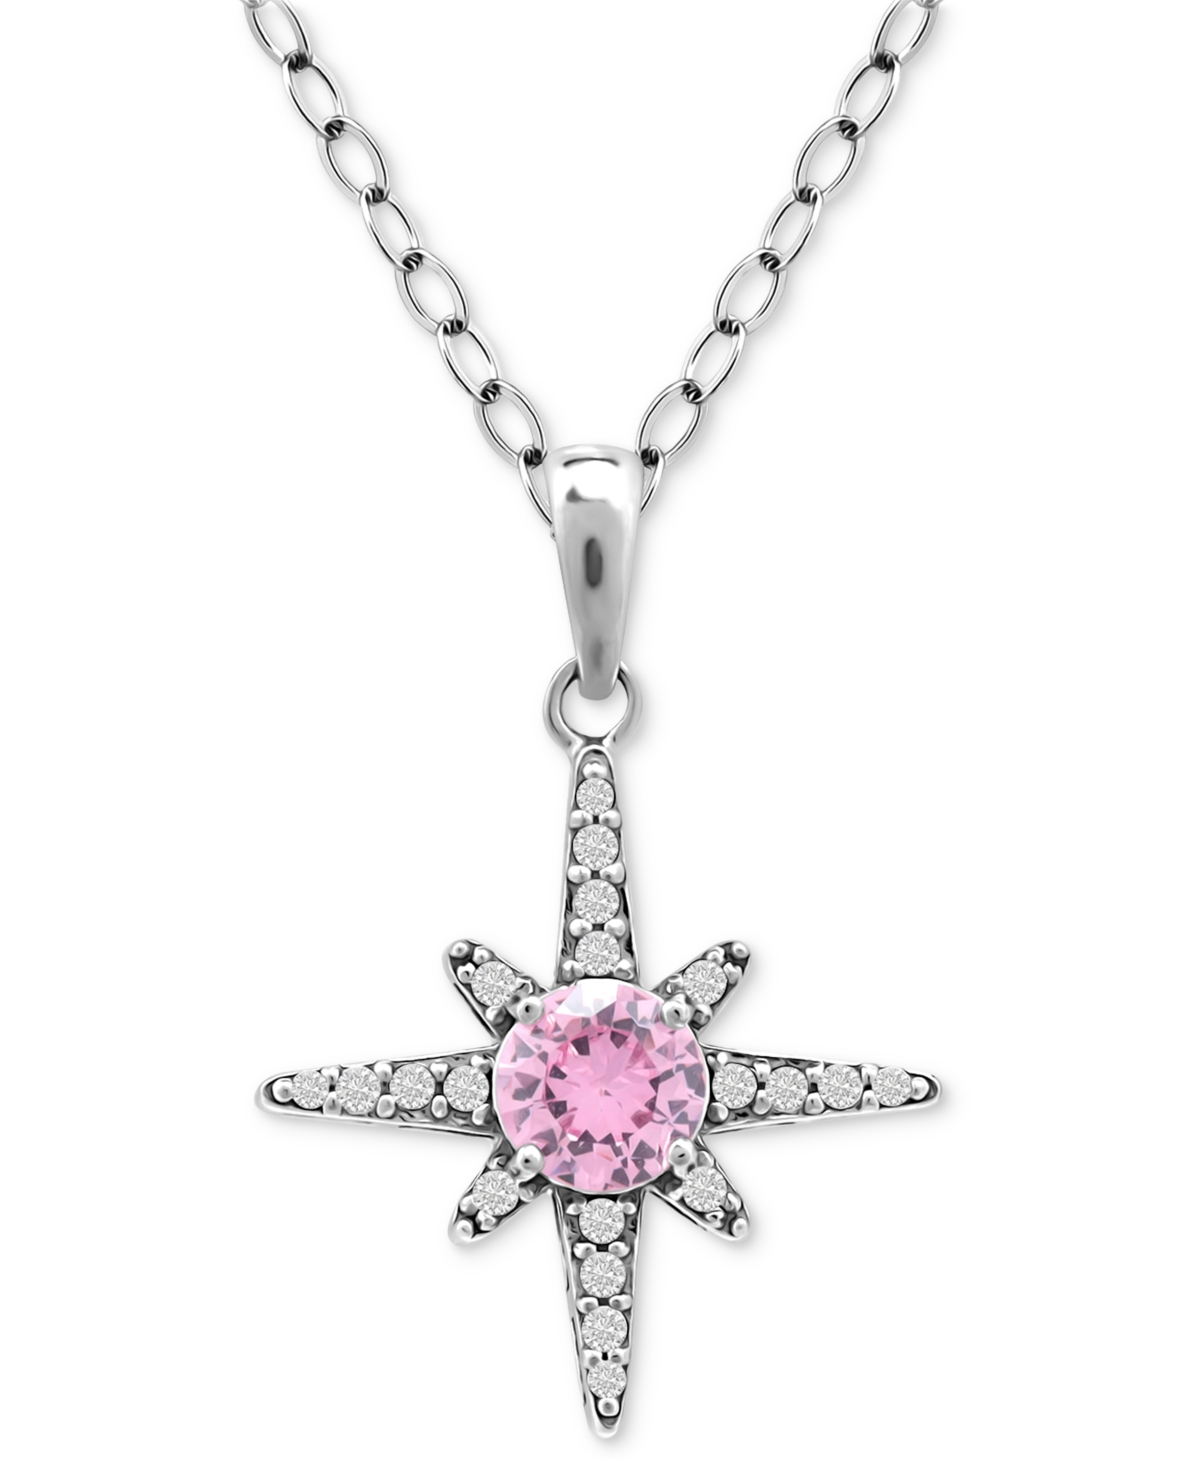 Giani Bernini Cubic Zirconia Celestial Star Pendant Necklace In Sterling Silver, 16" + 2" Extender, Created For Ma In Pink